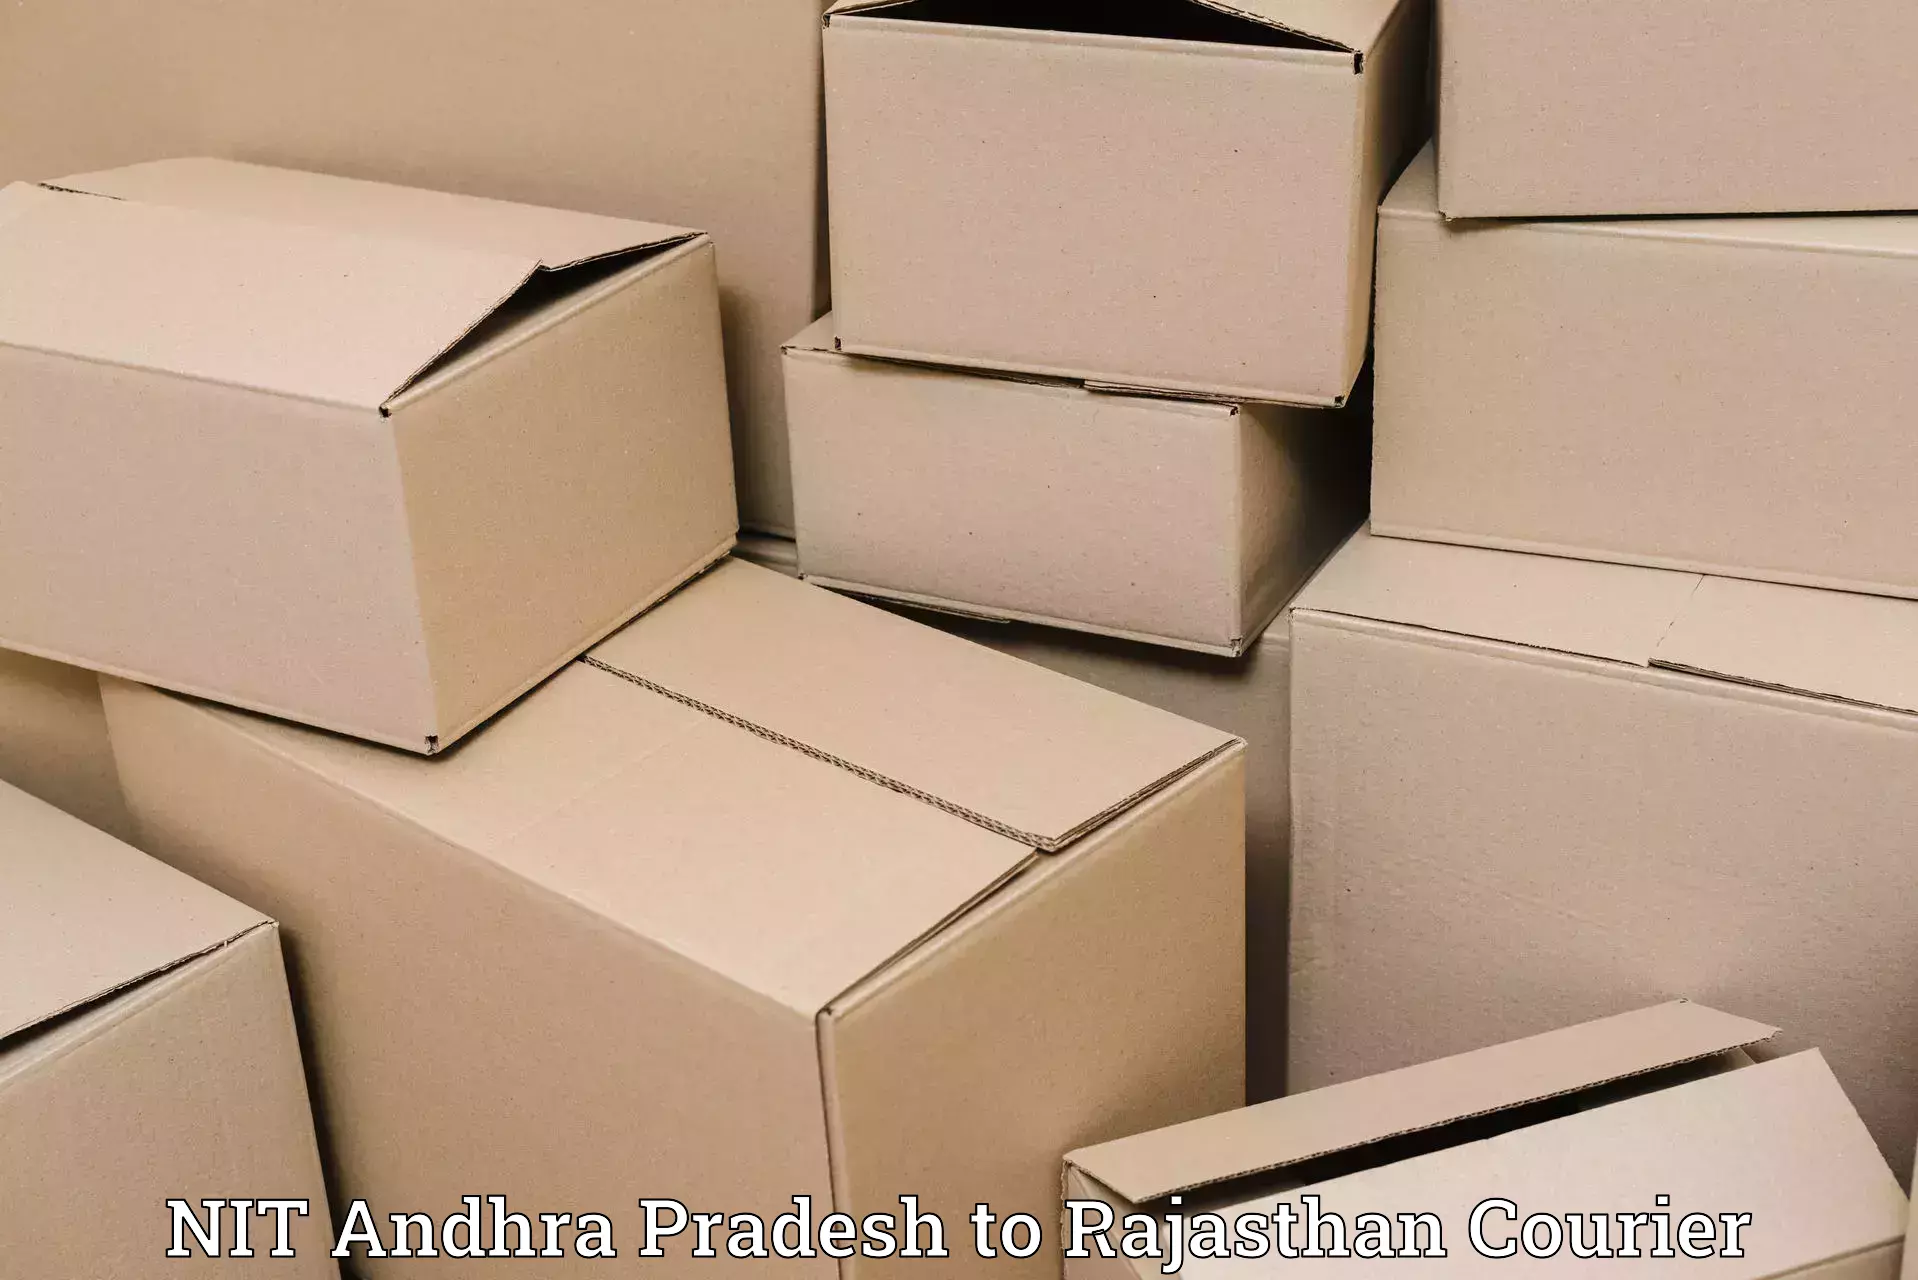 Personal parcel delivery in NIT Andhra Pradesh to Jodhpur